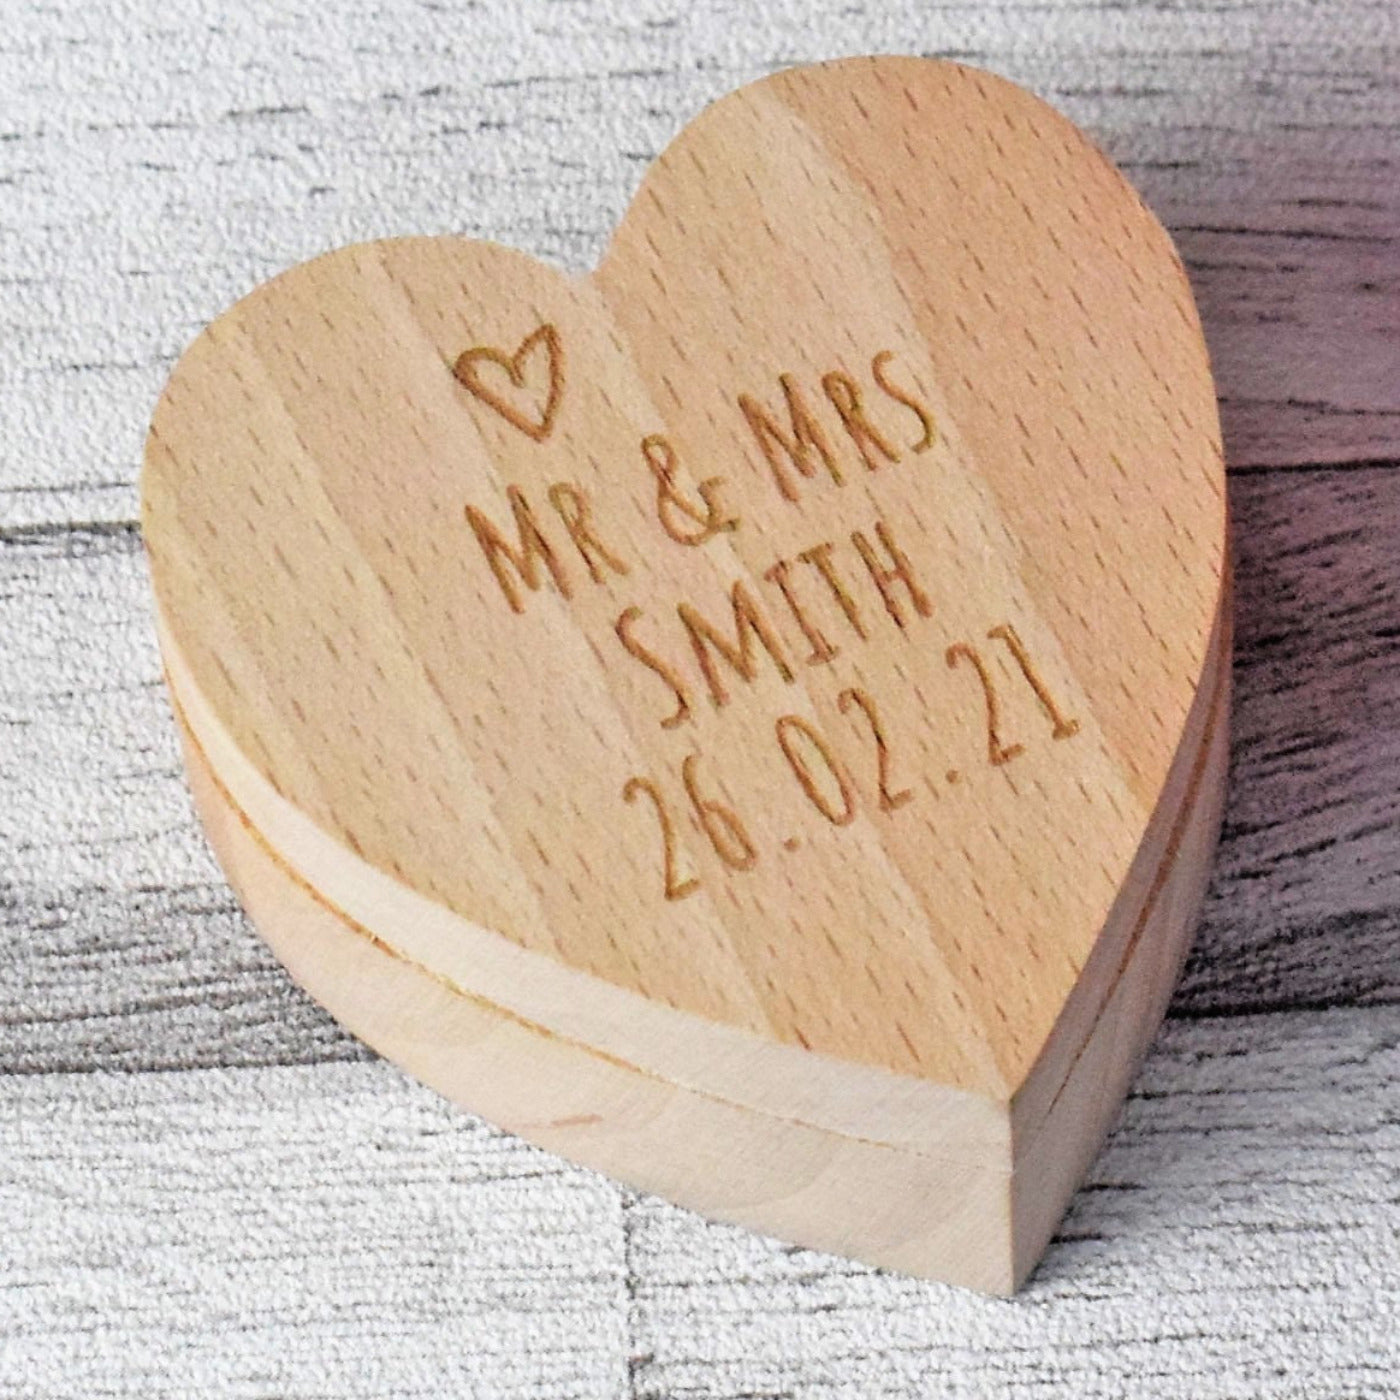 Personalised Wedding Ring Box - Engraved Wedding Ring Box Rustic Heart Shaped Wooden Ring Box - Wedding Day, Bride & Groom Surname